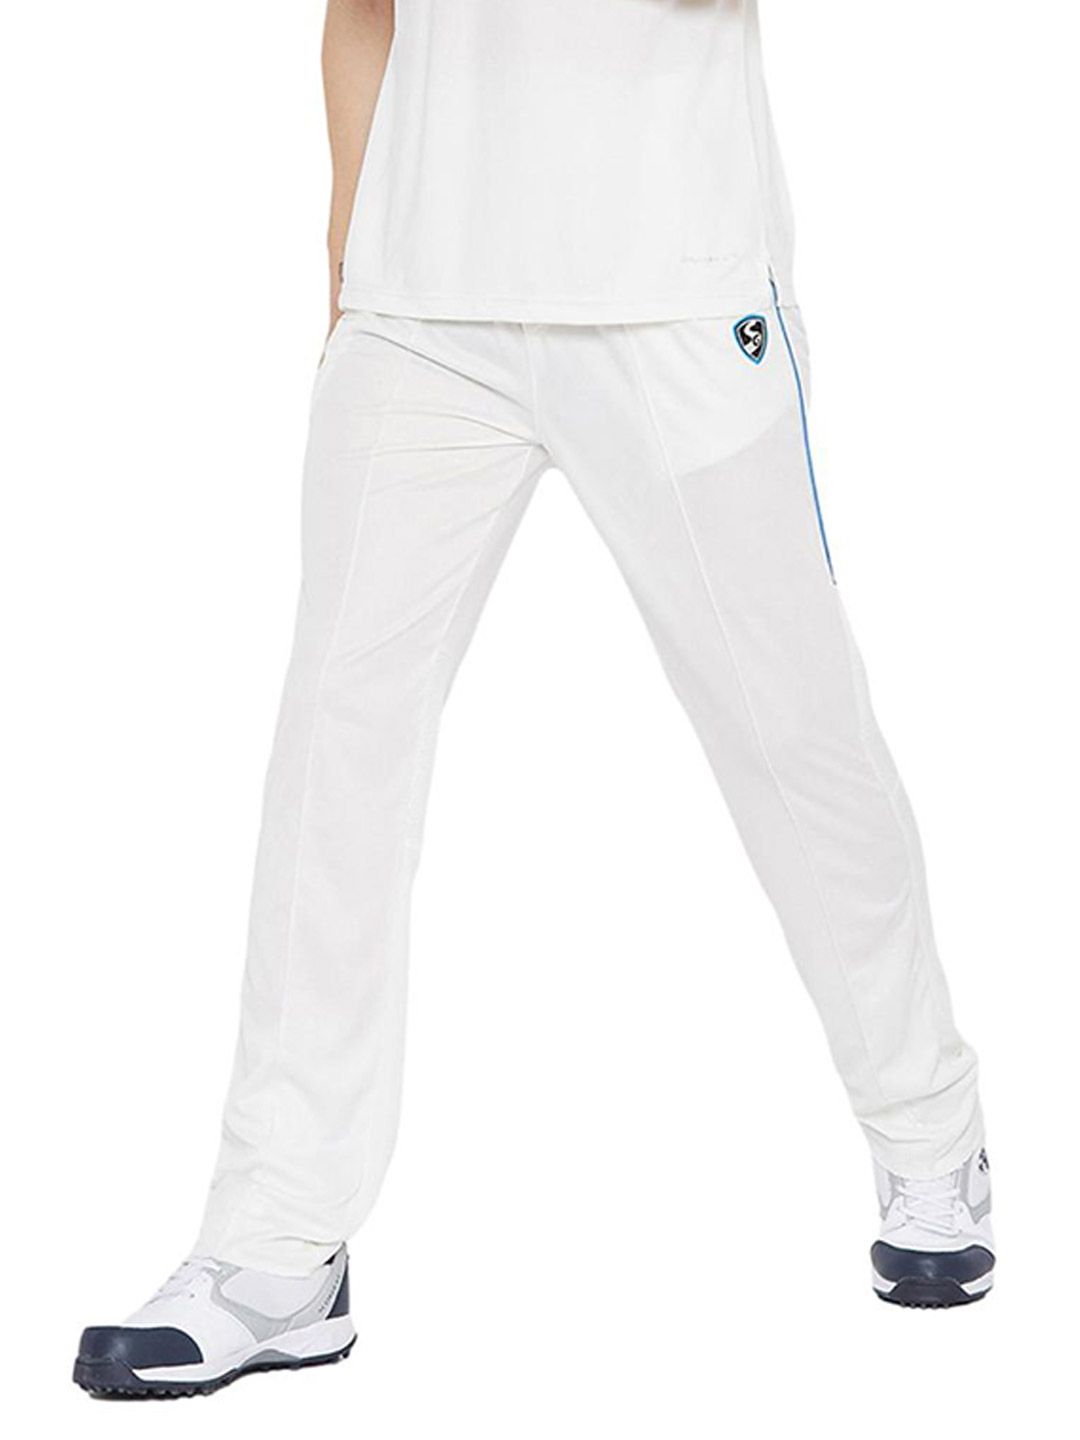 Puma Cricket Team Knit Pant 65705401 in Ranchi at best price by Choubey  Sports and Army Stores  Justdial